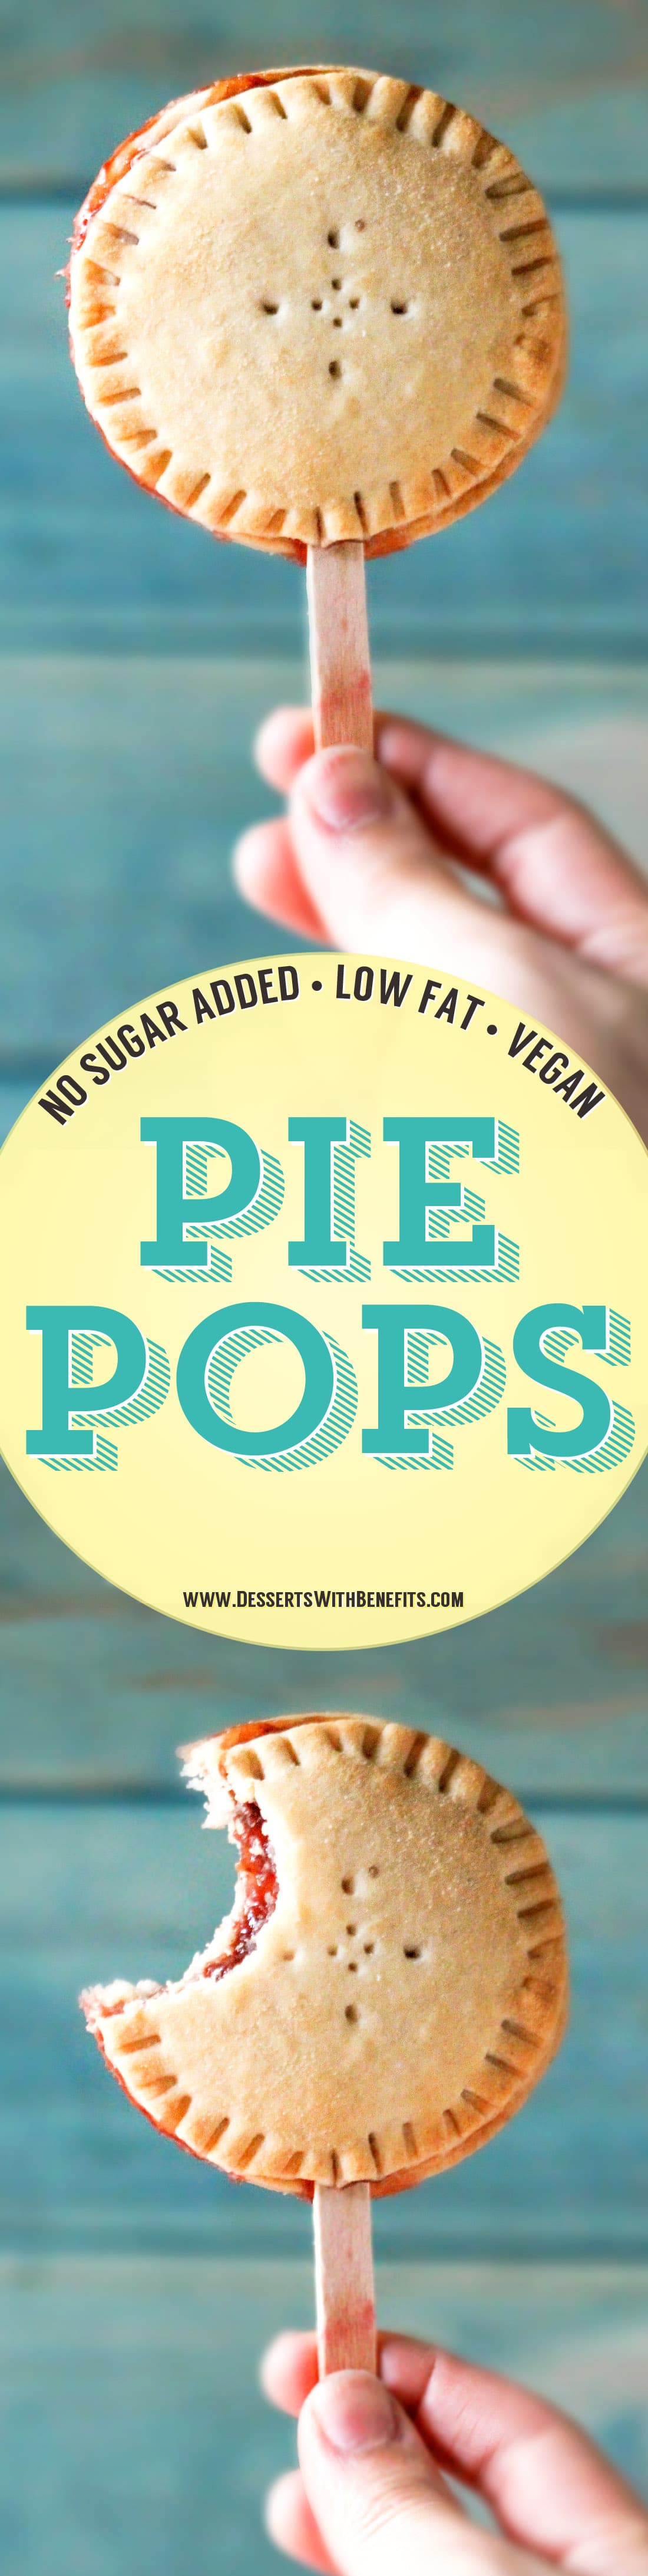 [14 healthy pie recipes to celebrate Pi Day] If you like pie but don't like sharing, then these Pie Pops are for YOU! You can make whatever flavor you like — strawberry to blueberry to apple to cranberry and more. These are a guaranteed crowdpleaser and no one could tell they’re totally guilt-free, low sugar, and vegan!